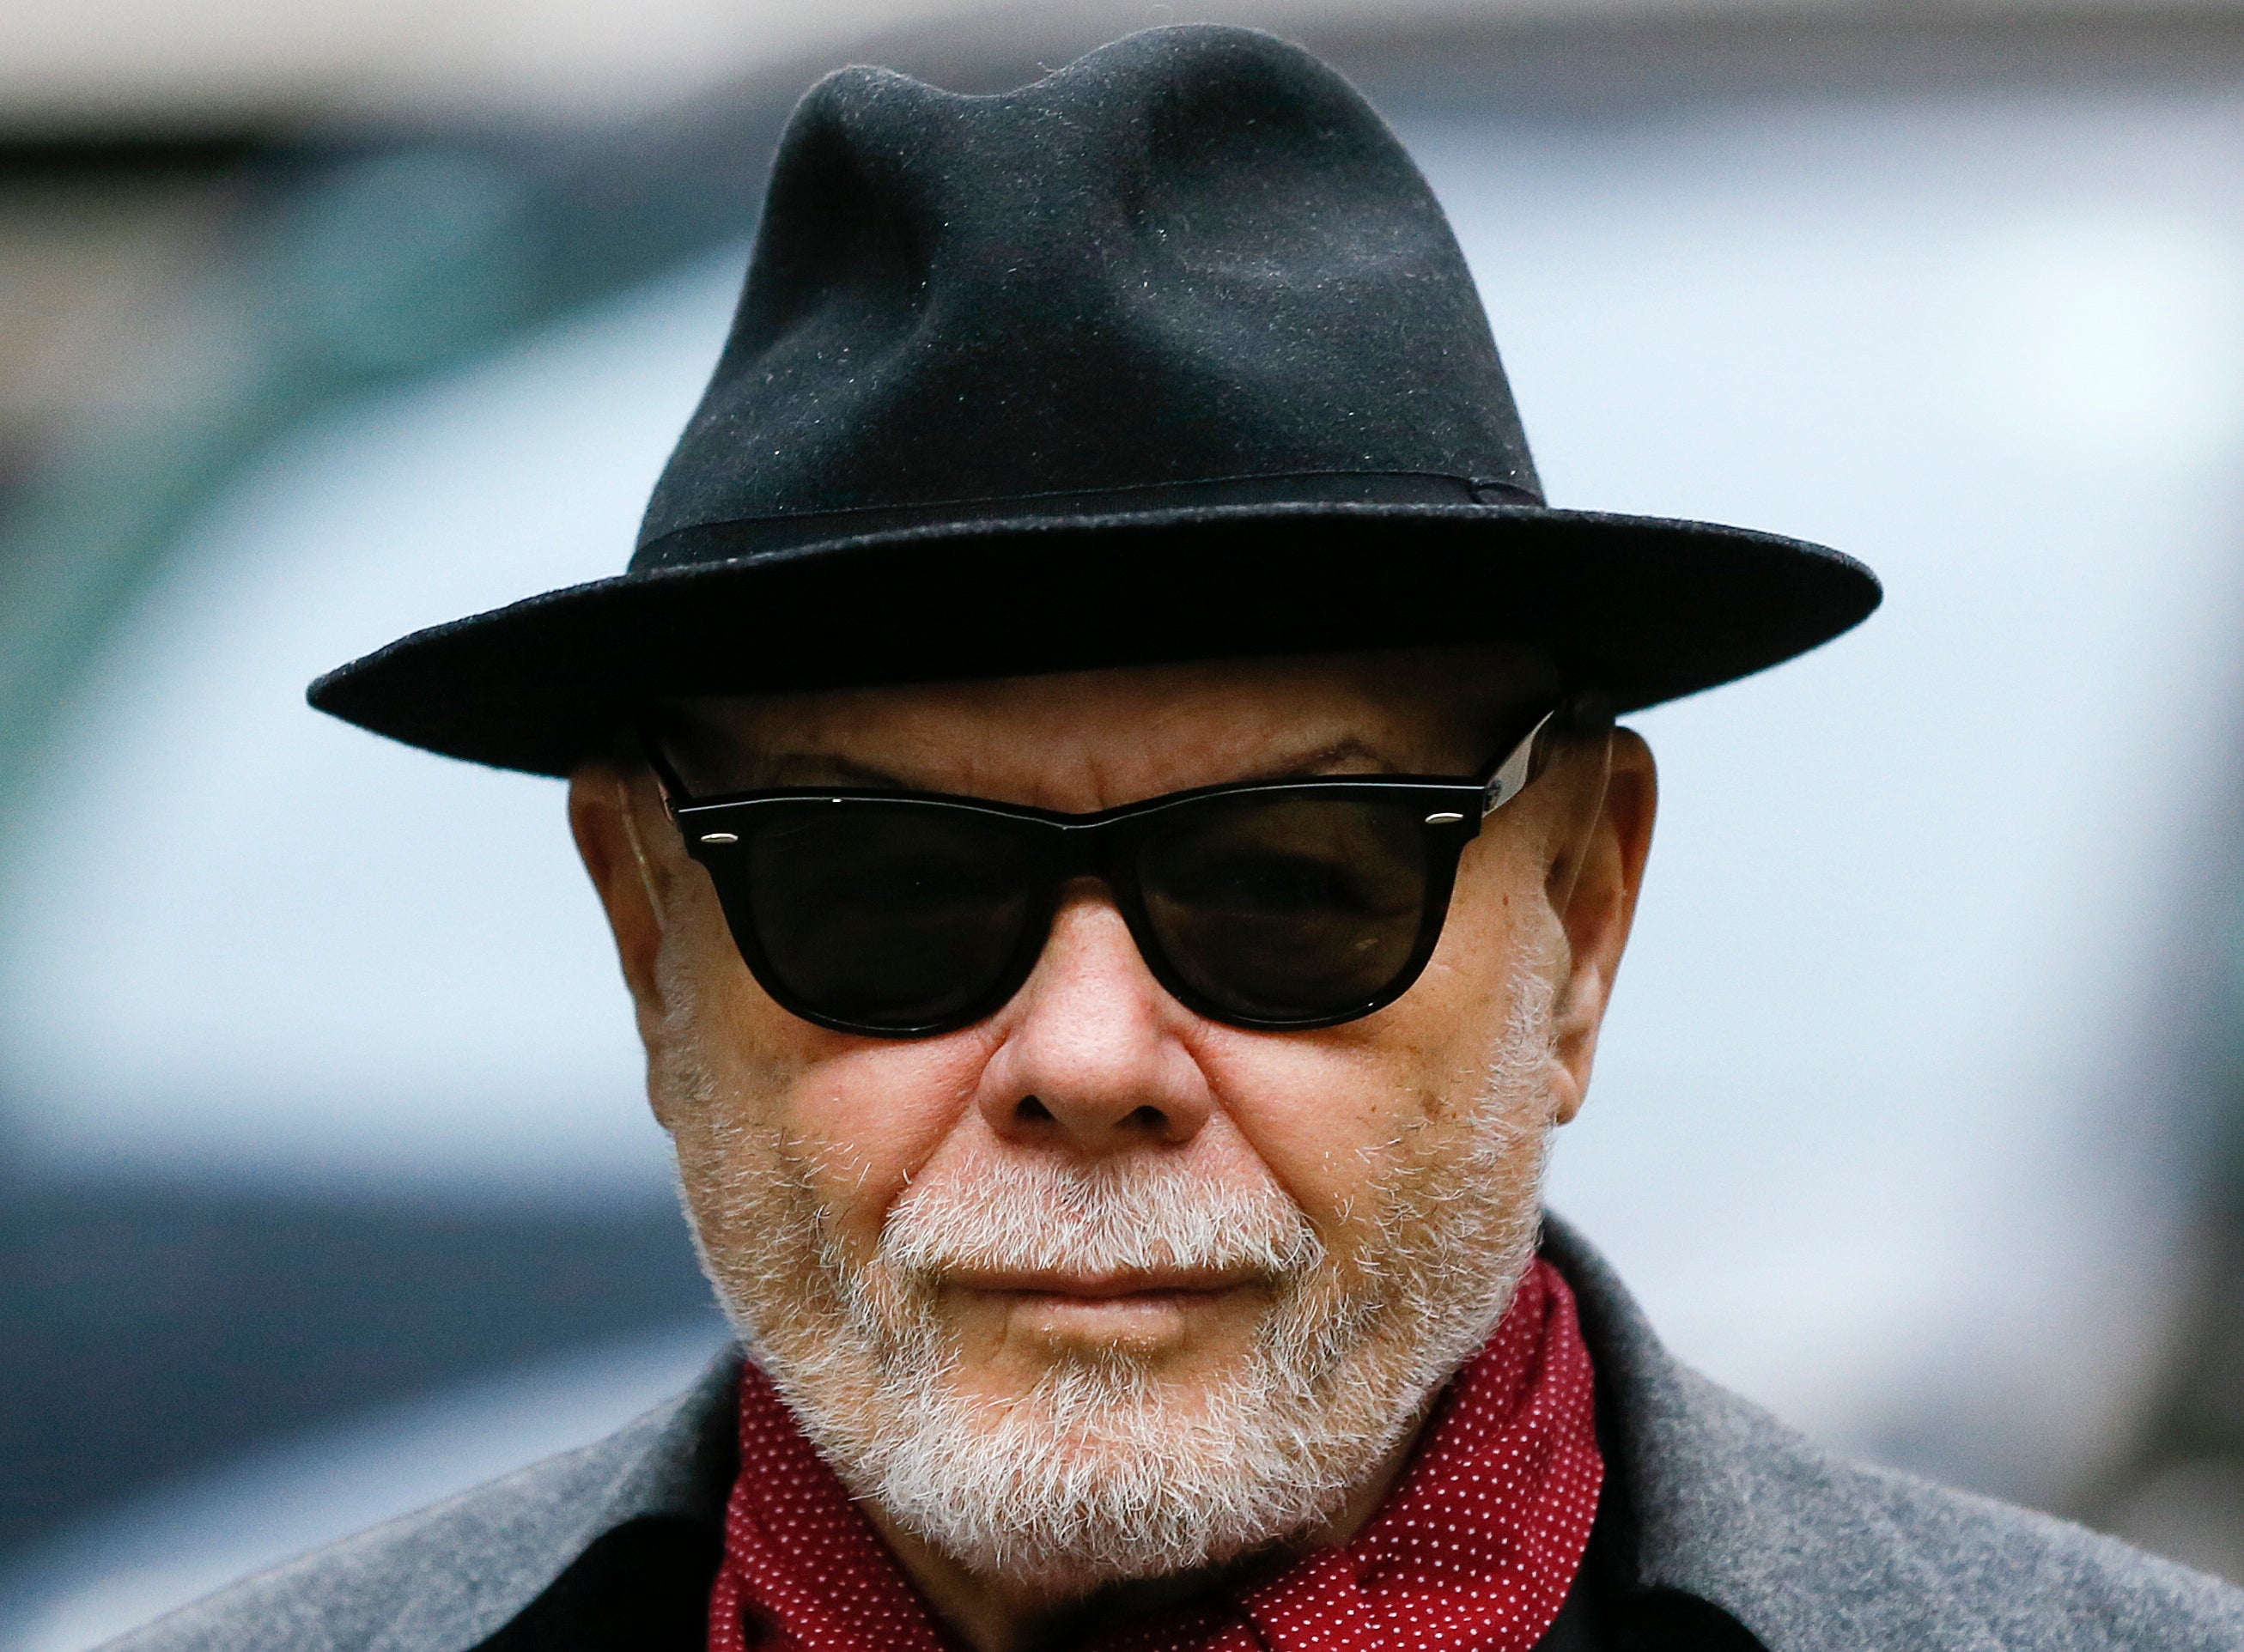 Gary Glitter was released from prison this week after serving half his sentence